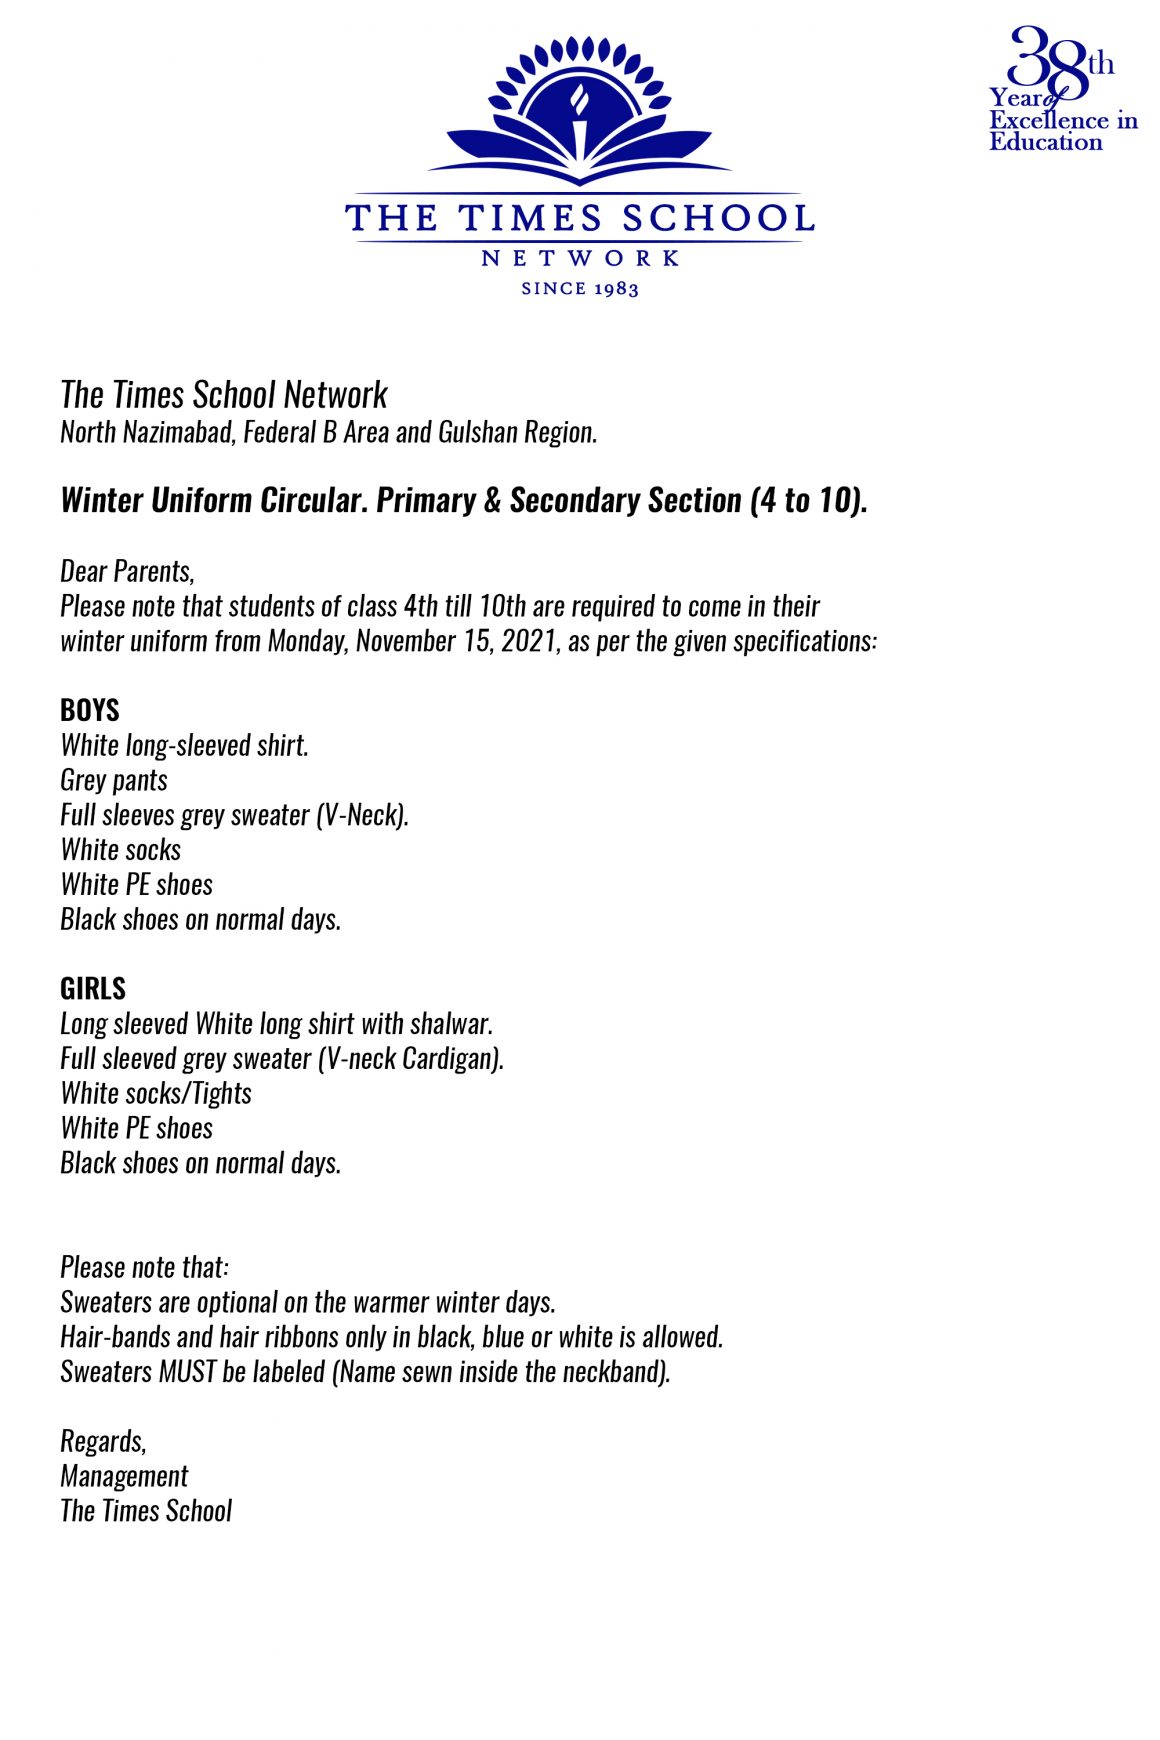 Winter Uniform Circular. Primary & Secondary Section (4 to 10).